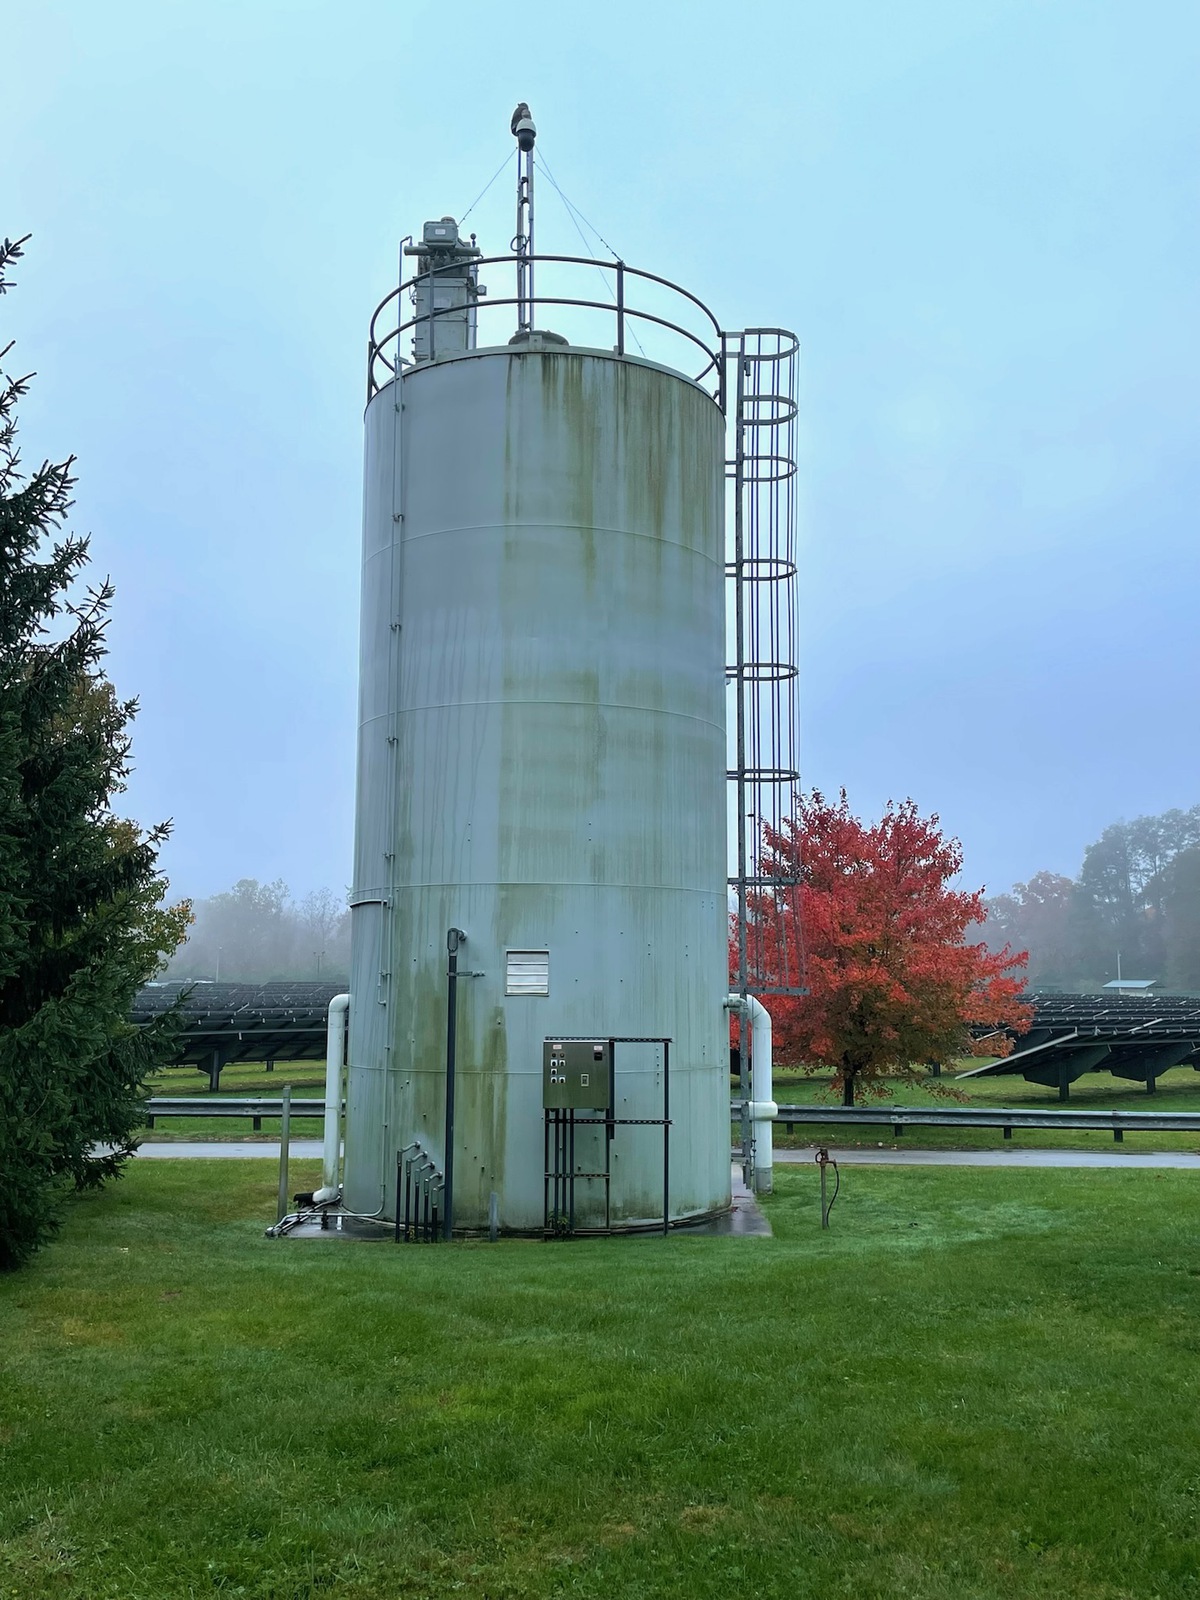 a large silo that is not cleaned, covered in organic moss and dirt